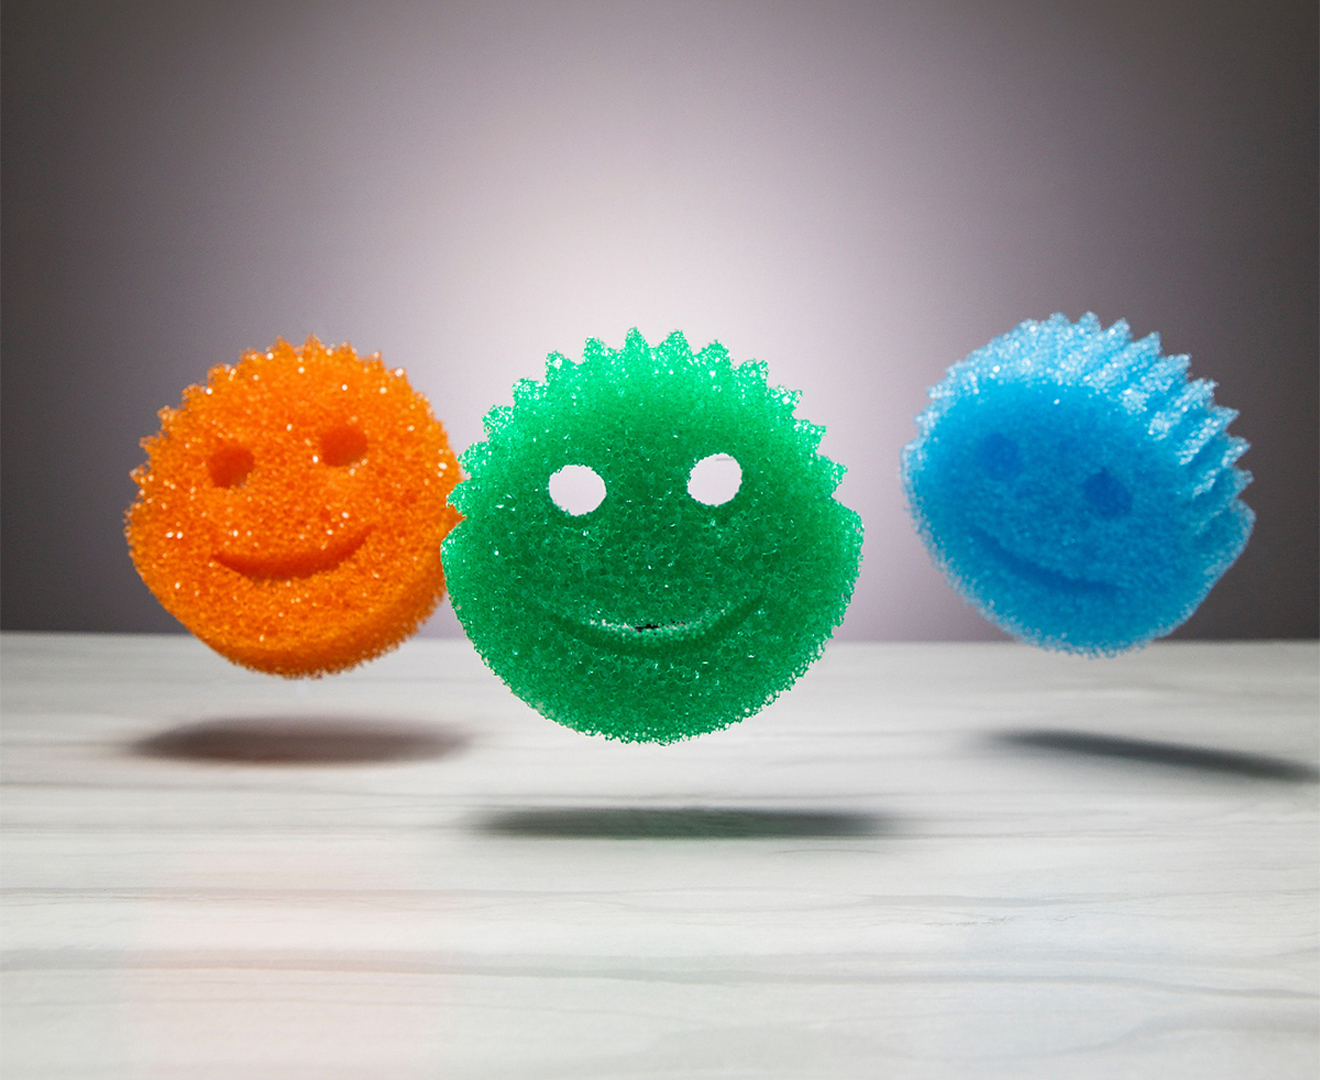 Scour Daddy Set of 18 Multi-Color Sponges by Scrub Daddy 